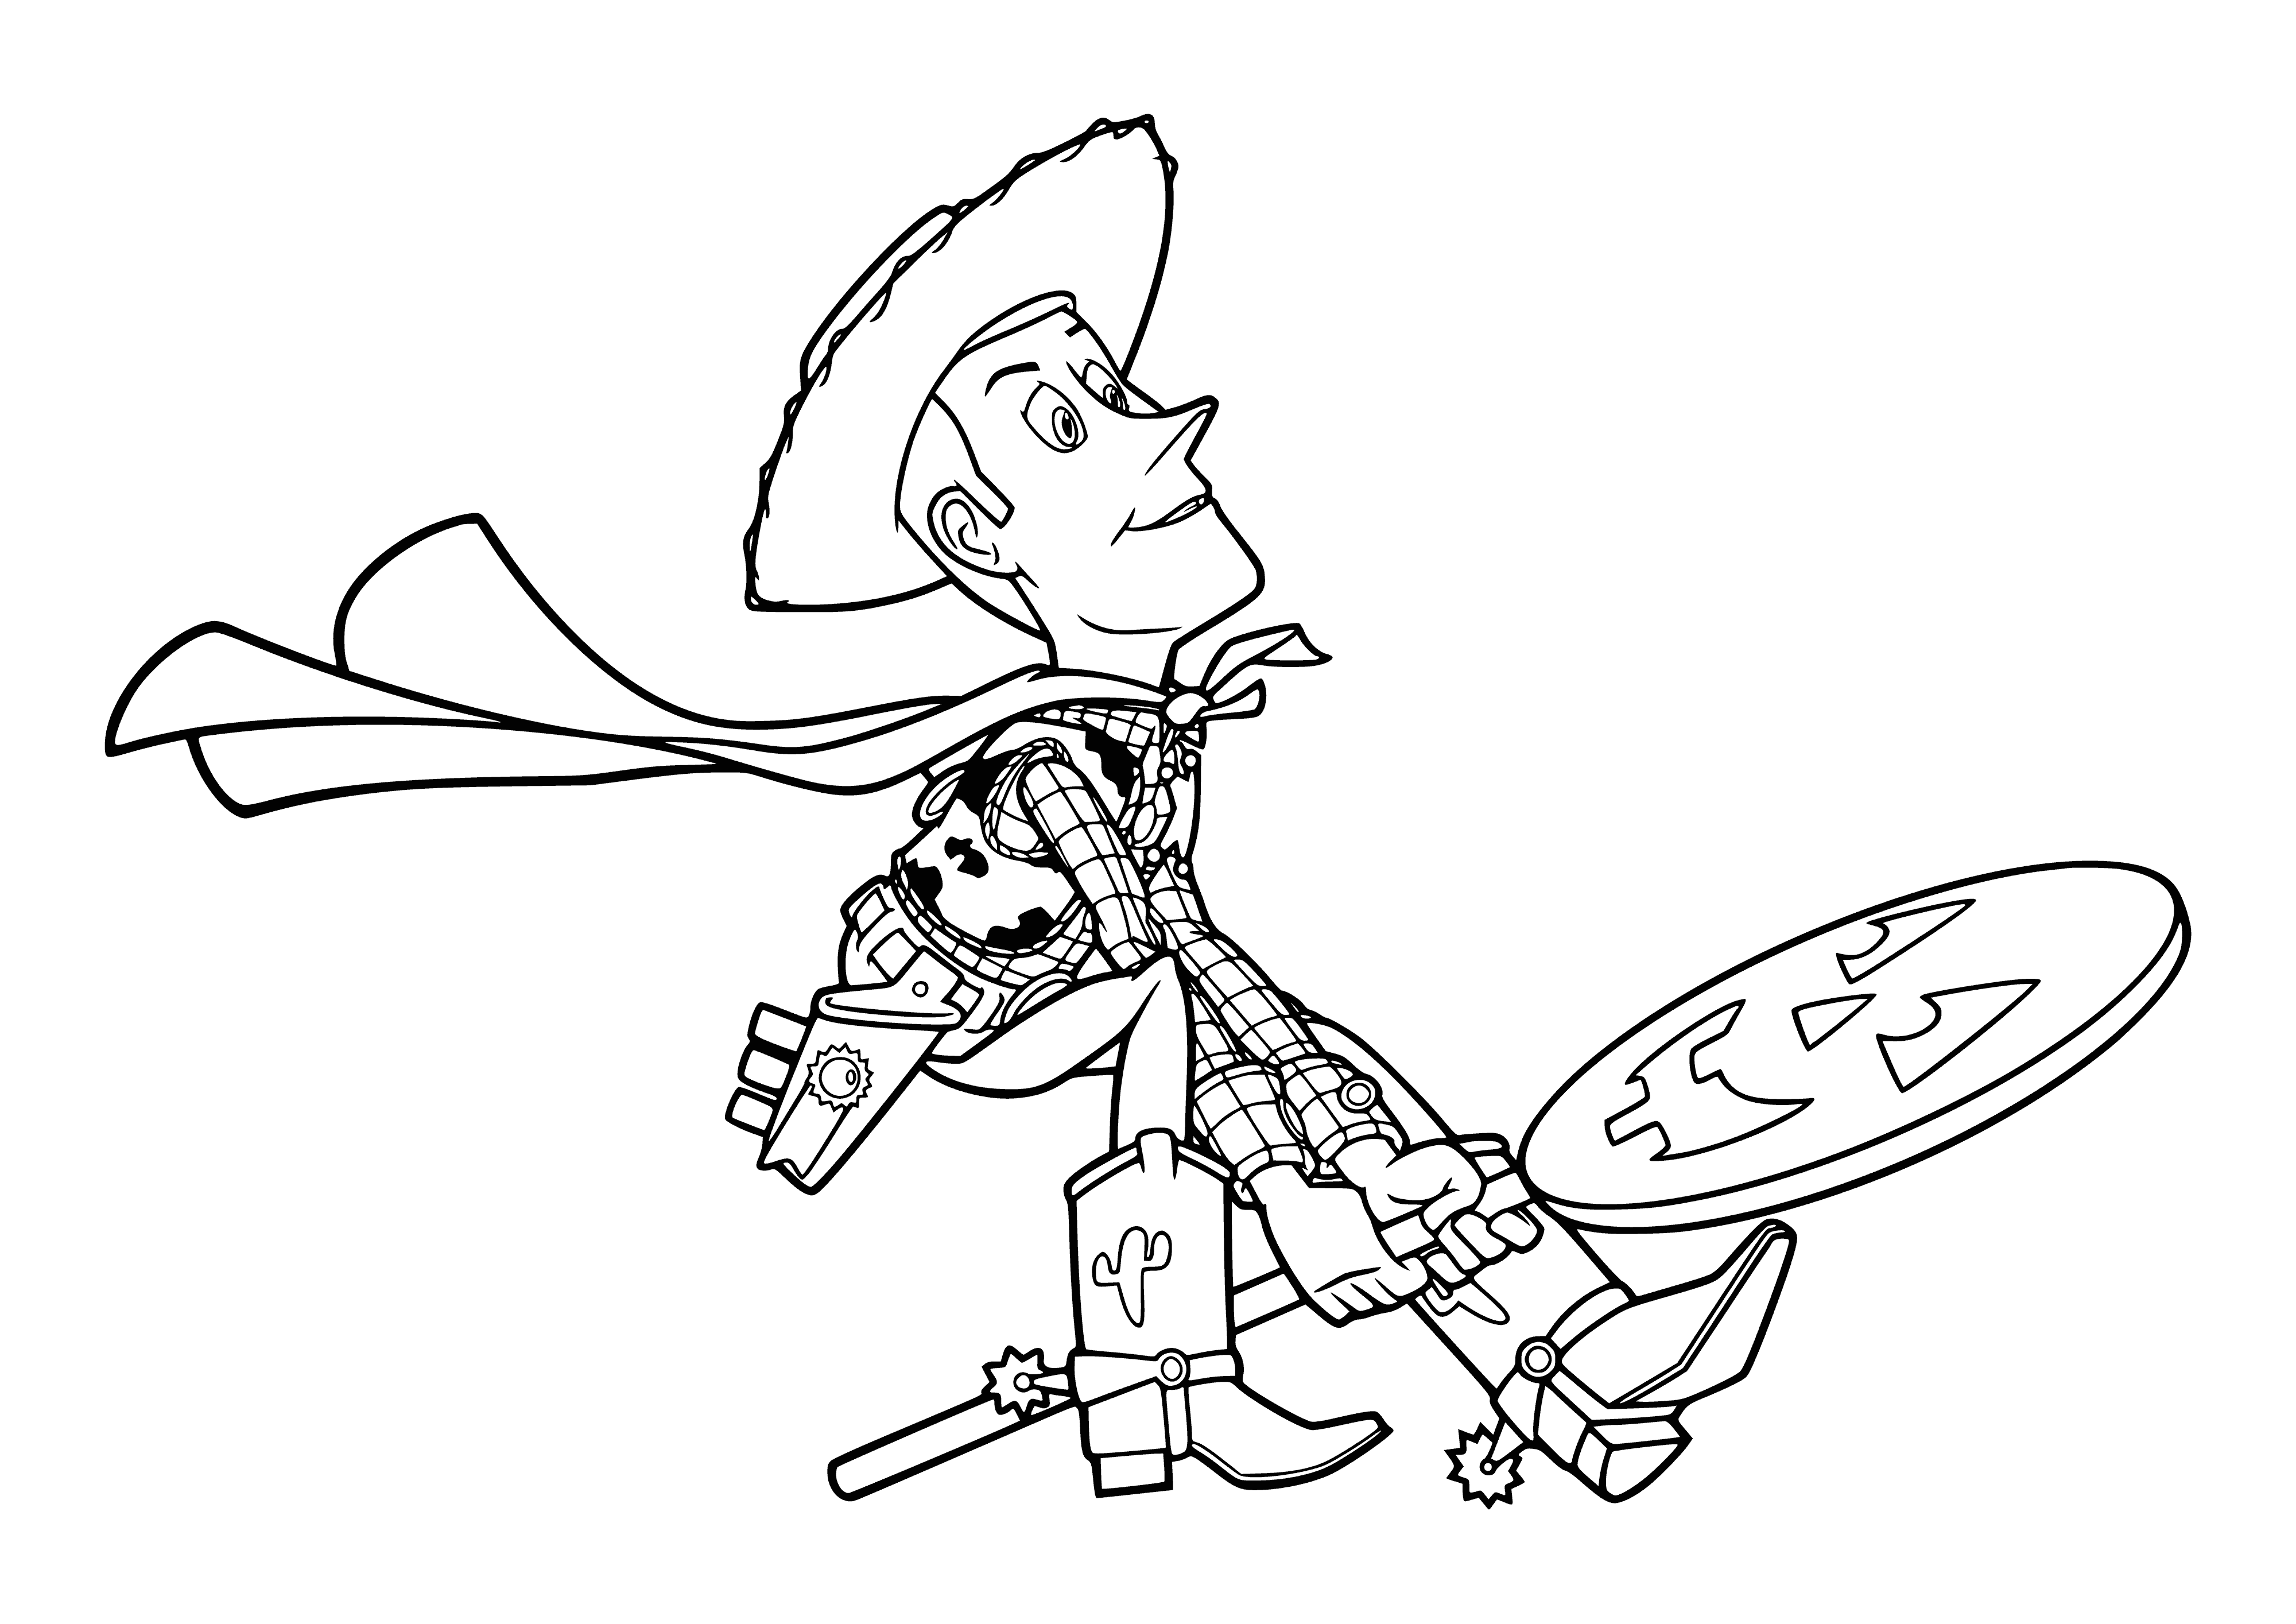 coloring page: Woody is delightedly getting ready for Halloween, wearing a sheriff's badge with a gun in hand. In the background is a pumpkin, scarecrow and trees.